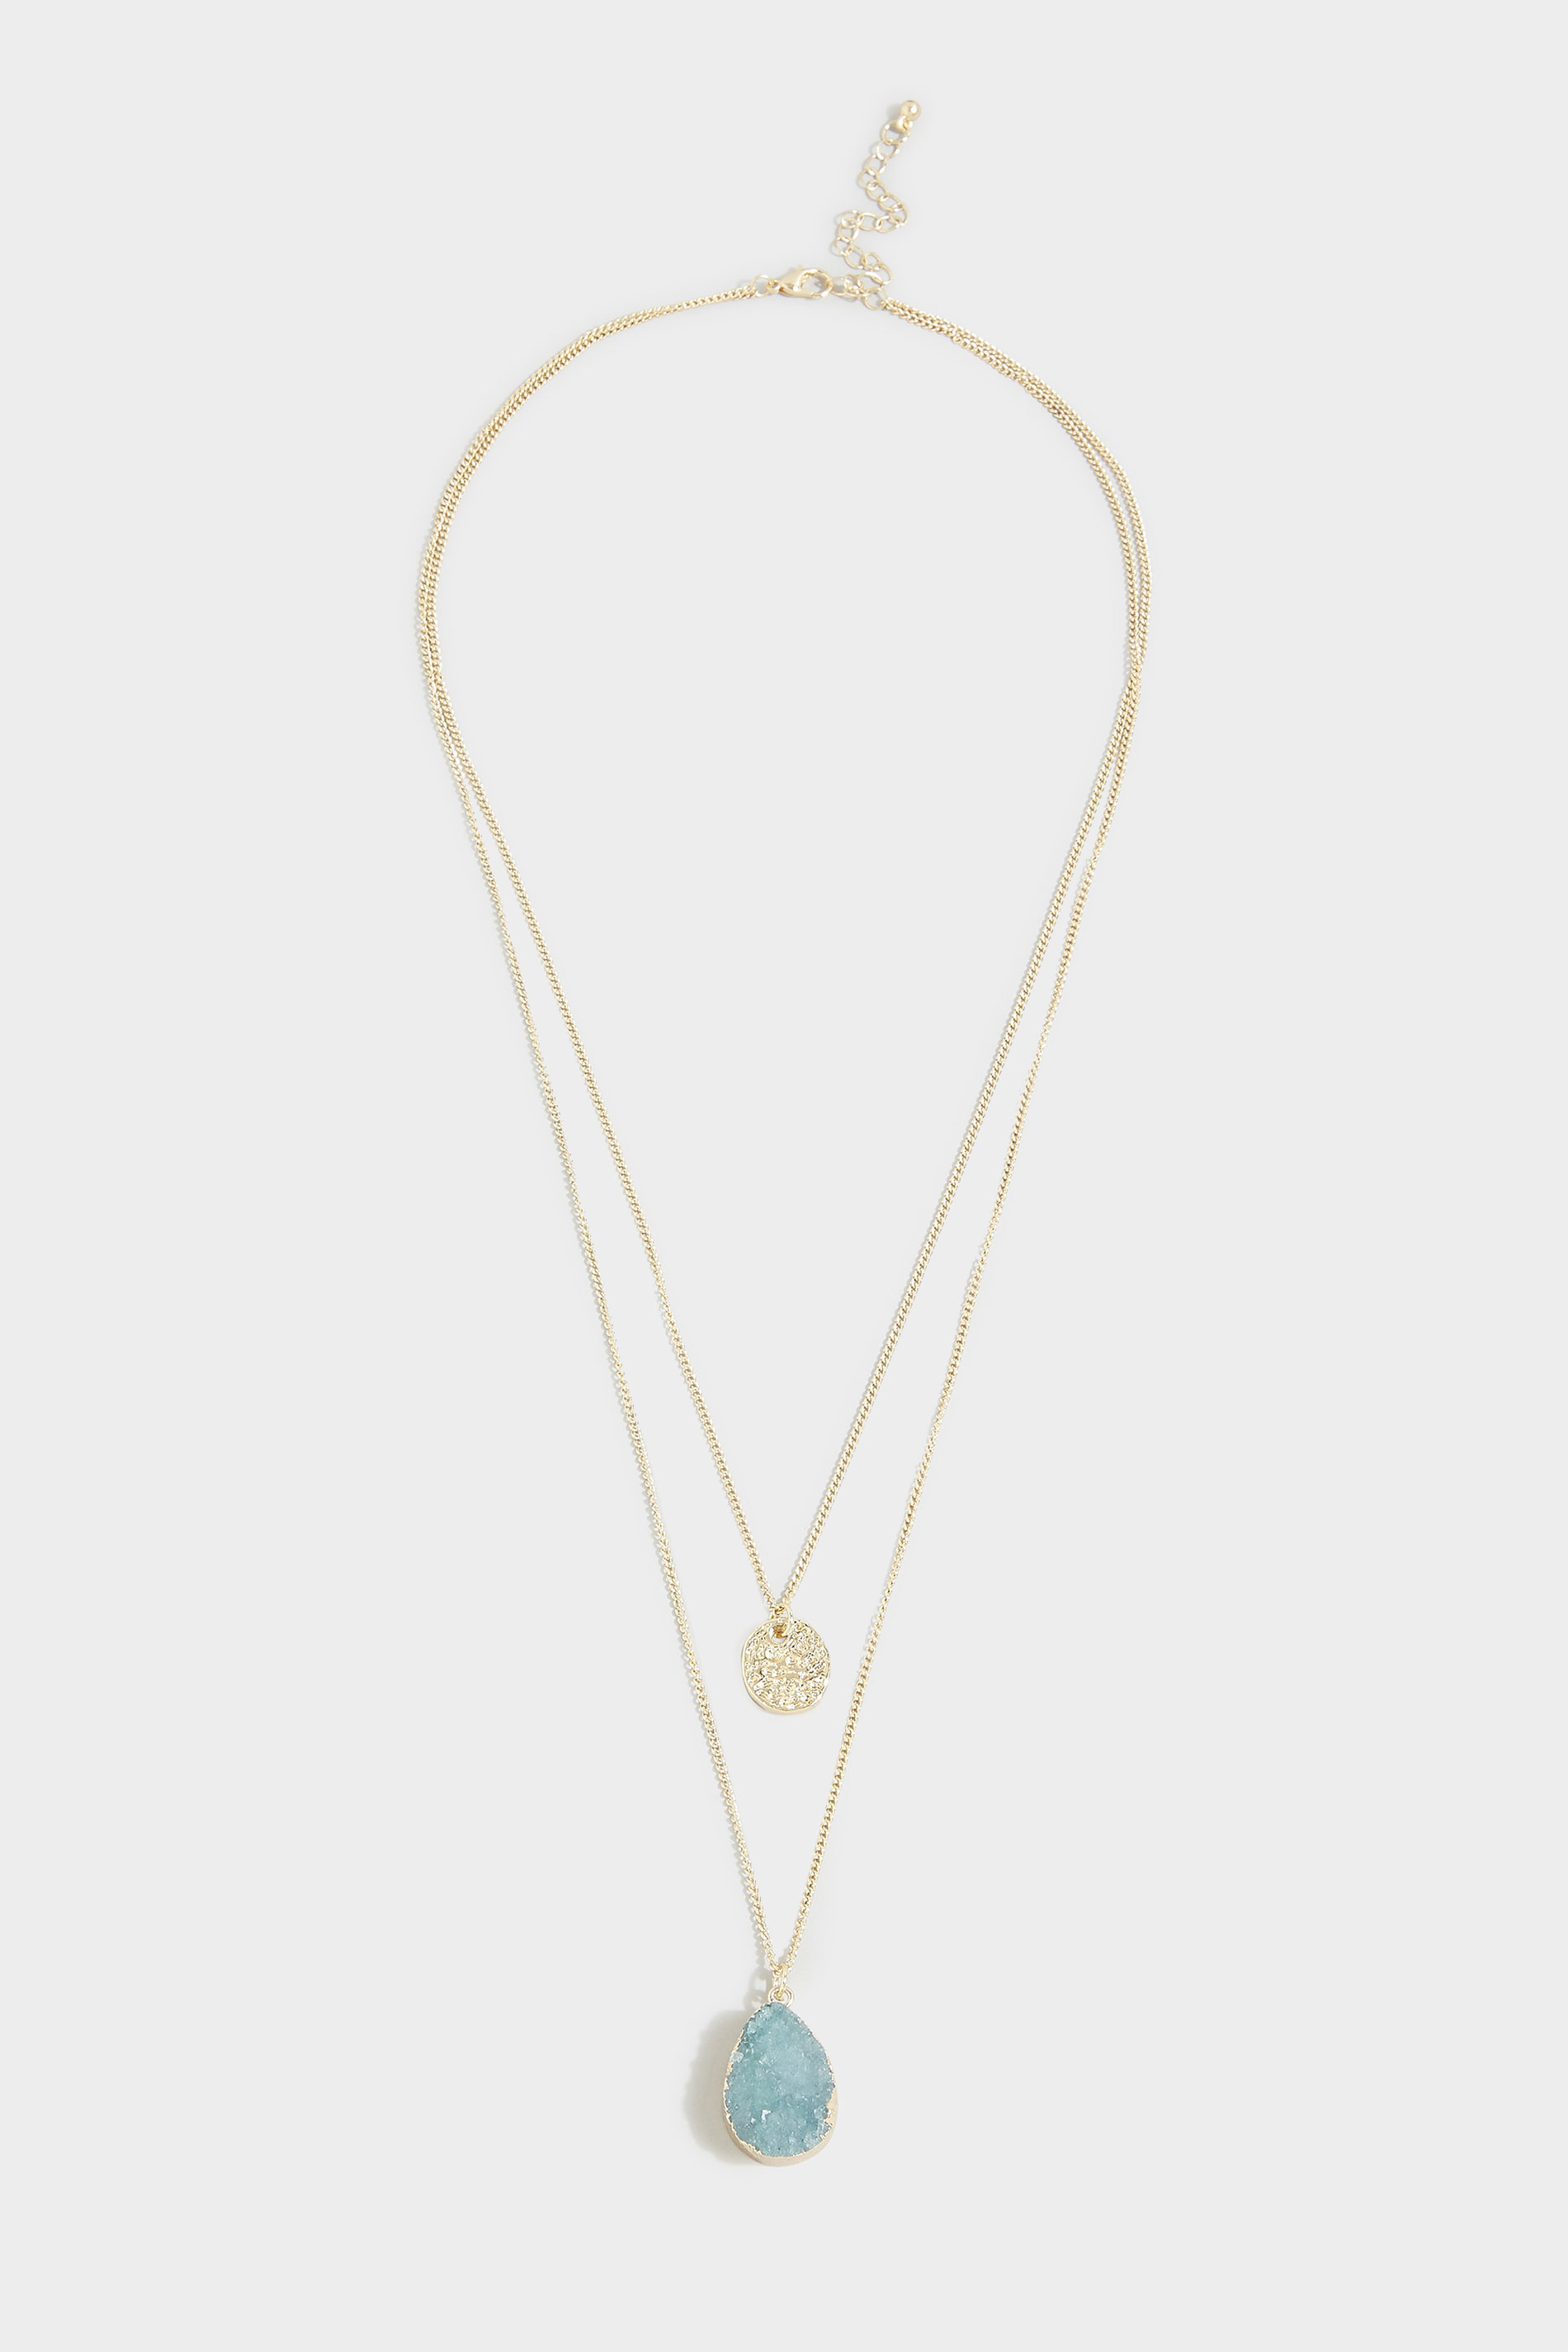 Gold Tone Double Layer Stone Necklace_1.jpg